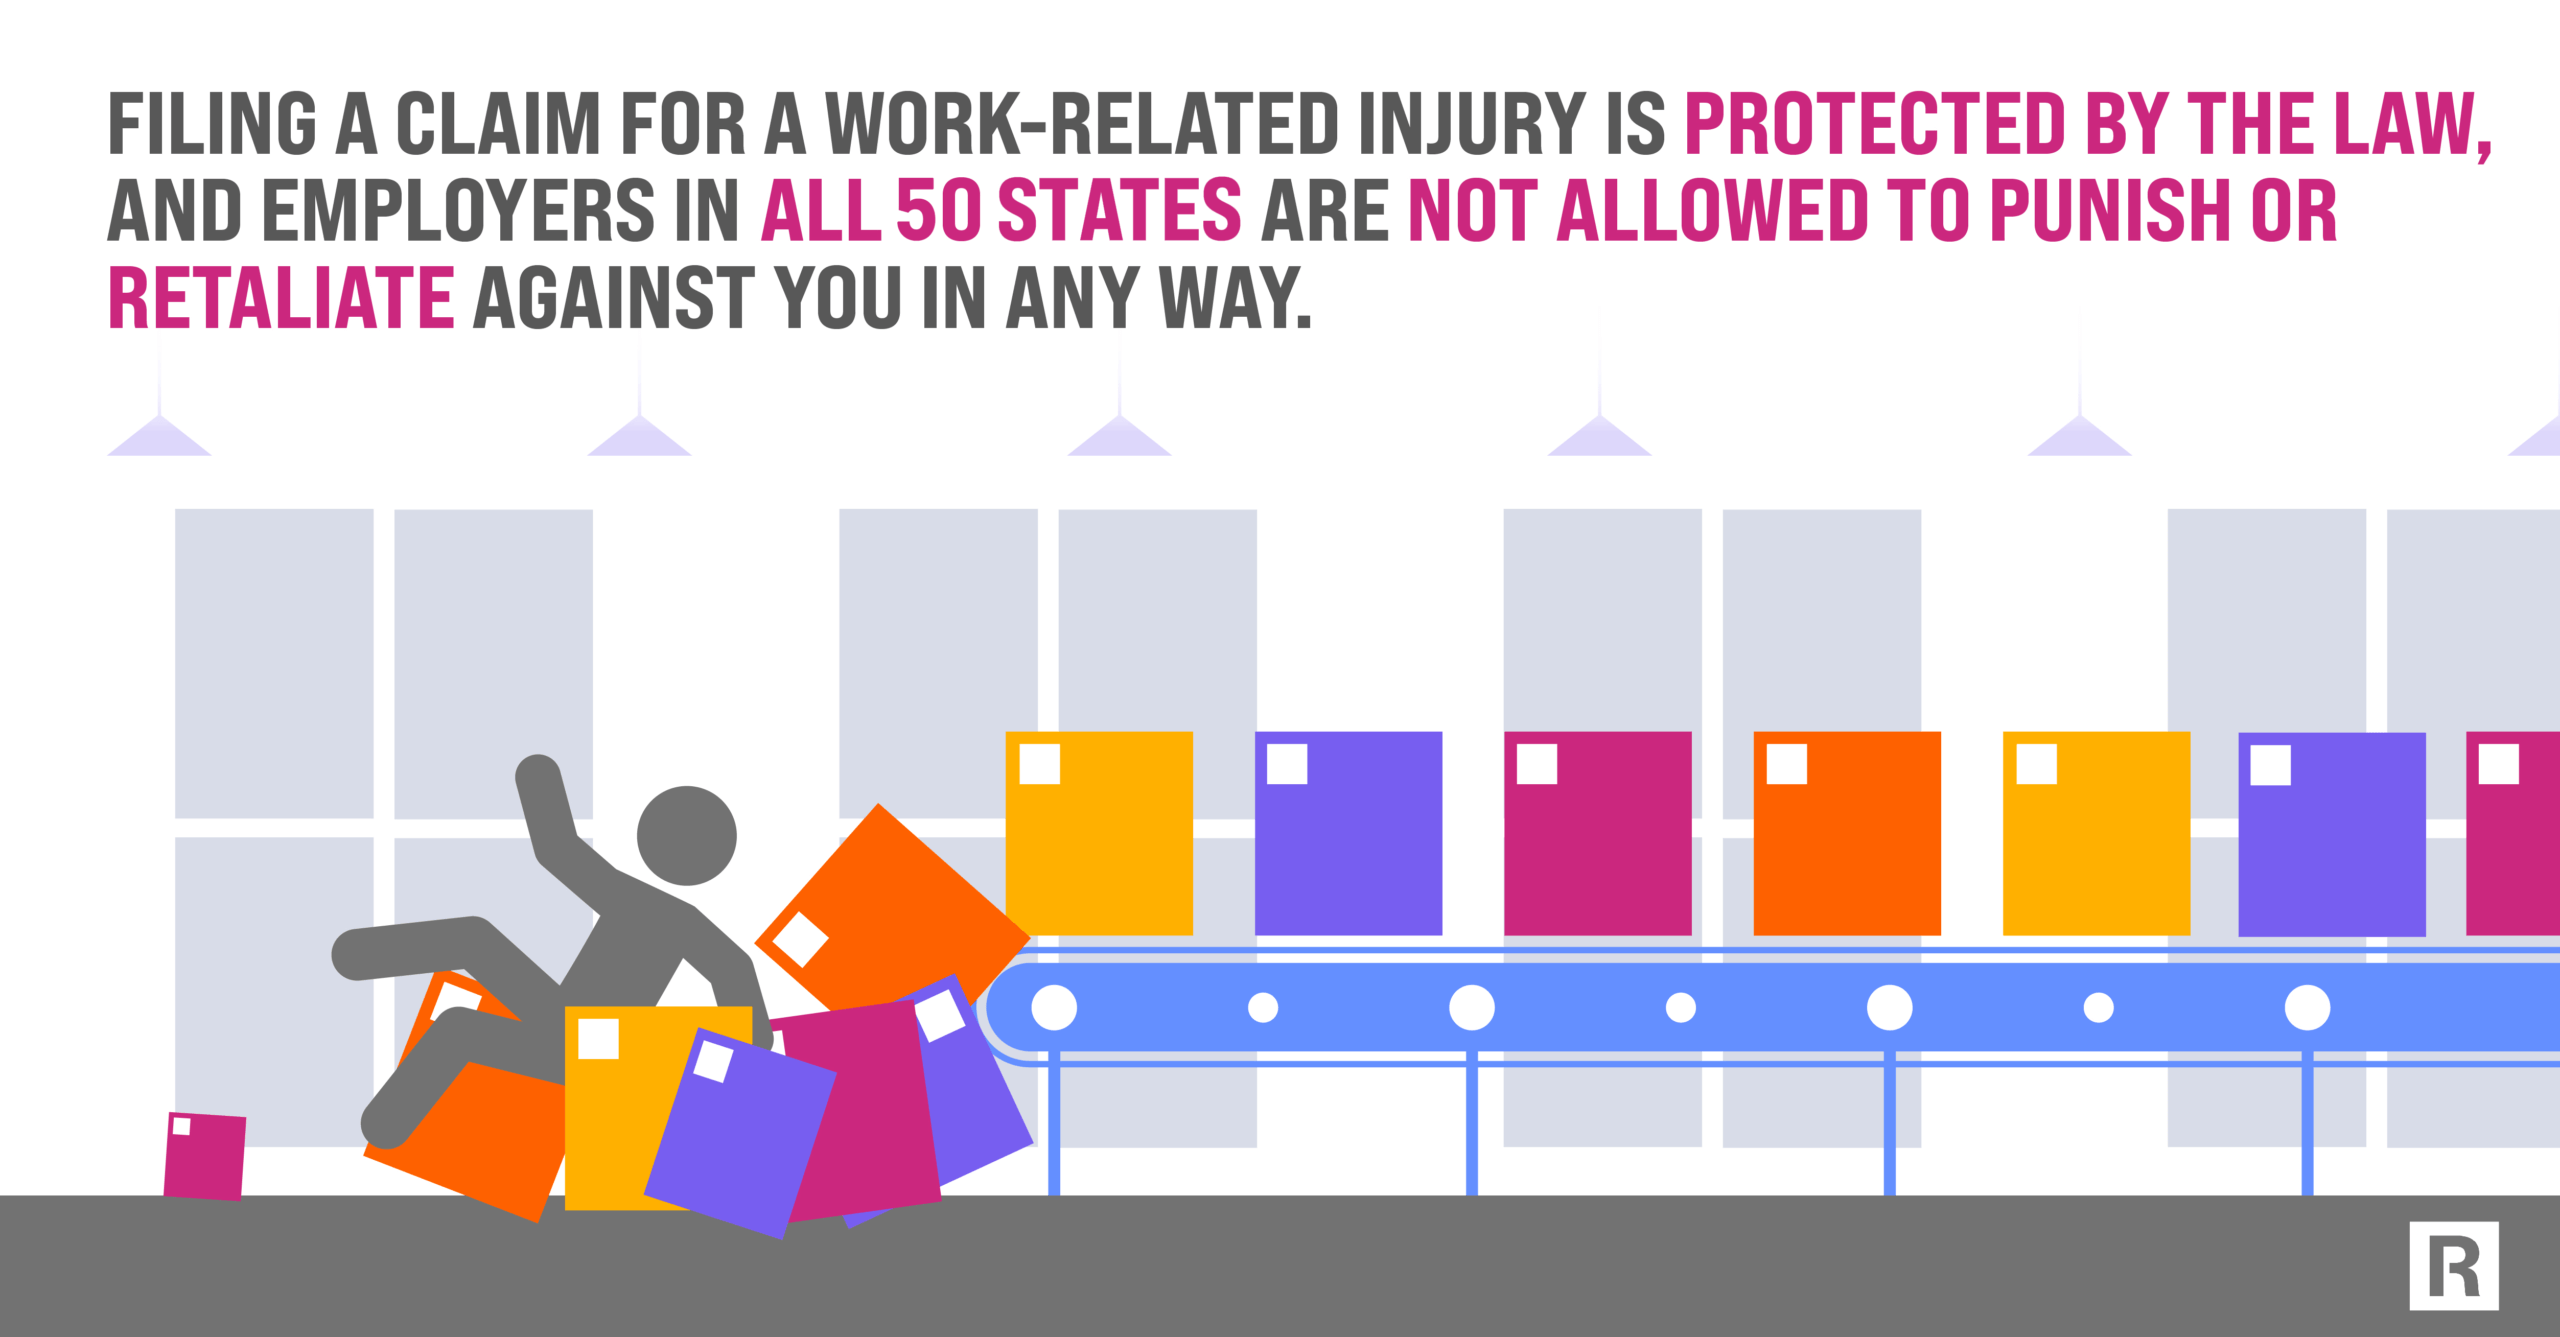 filing a claim for a work-related injury is protected by the law, and employers in all 50 states are not allowed to punish or retaliate against you in any way.